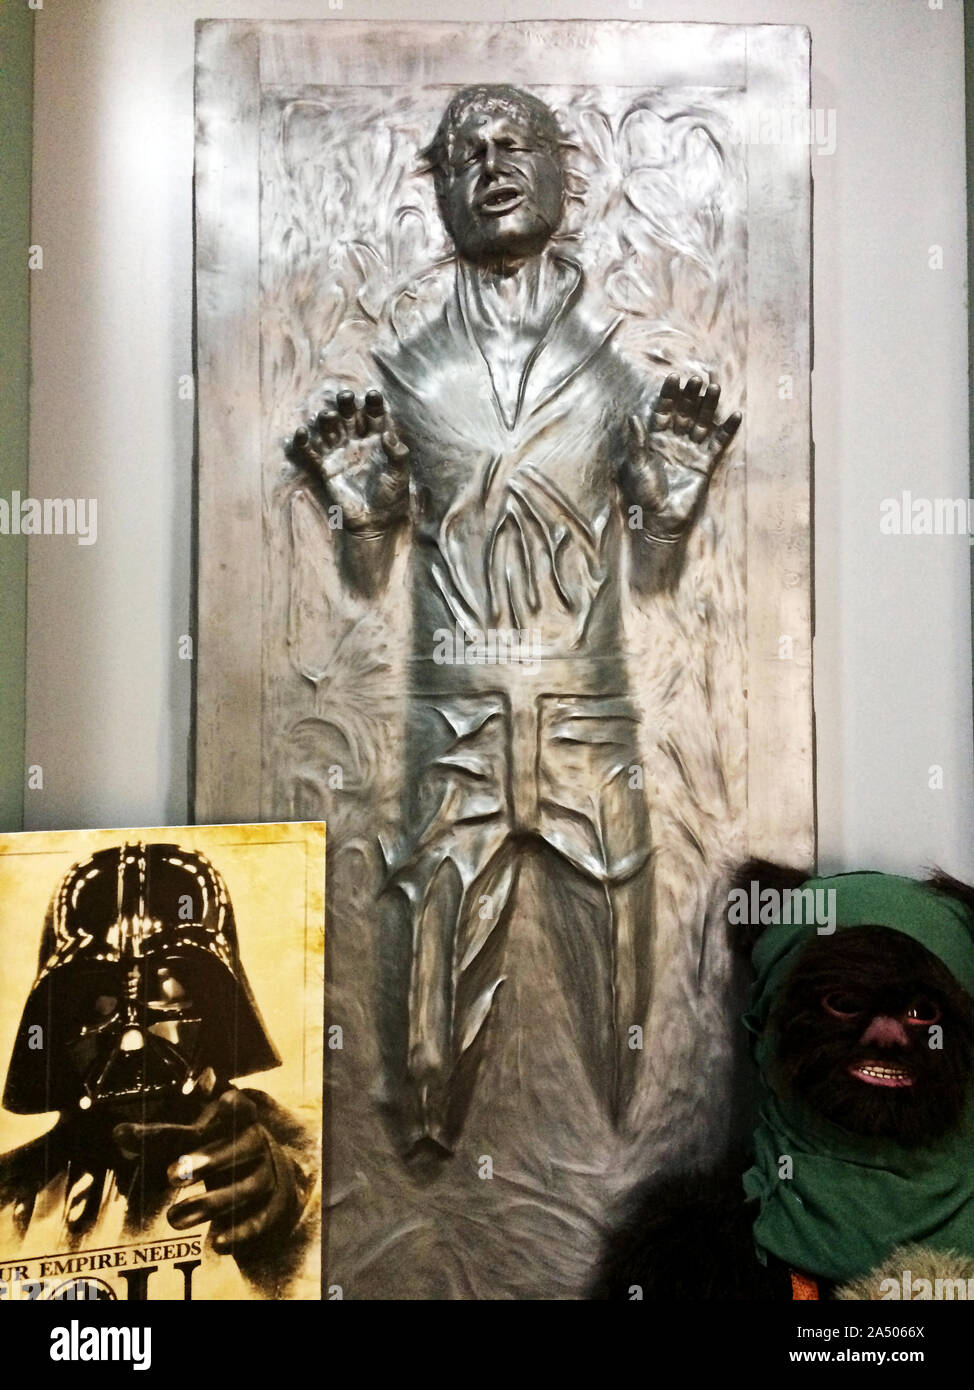 Reproduction in original scales of Han Solo carbon frozen in Star Wars  movie saga Stock Photo - Alamy